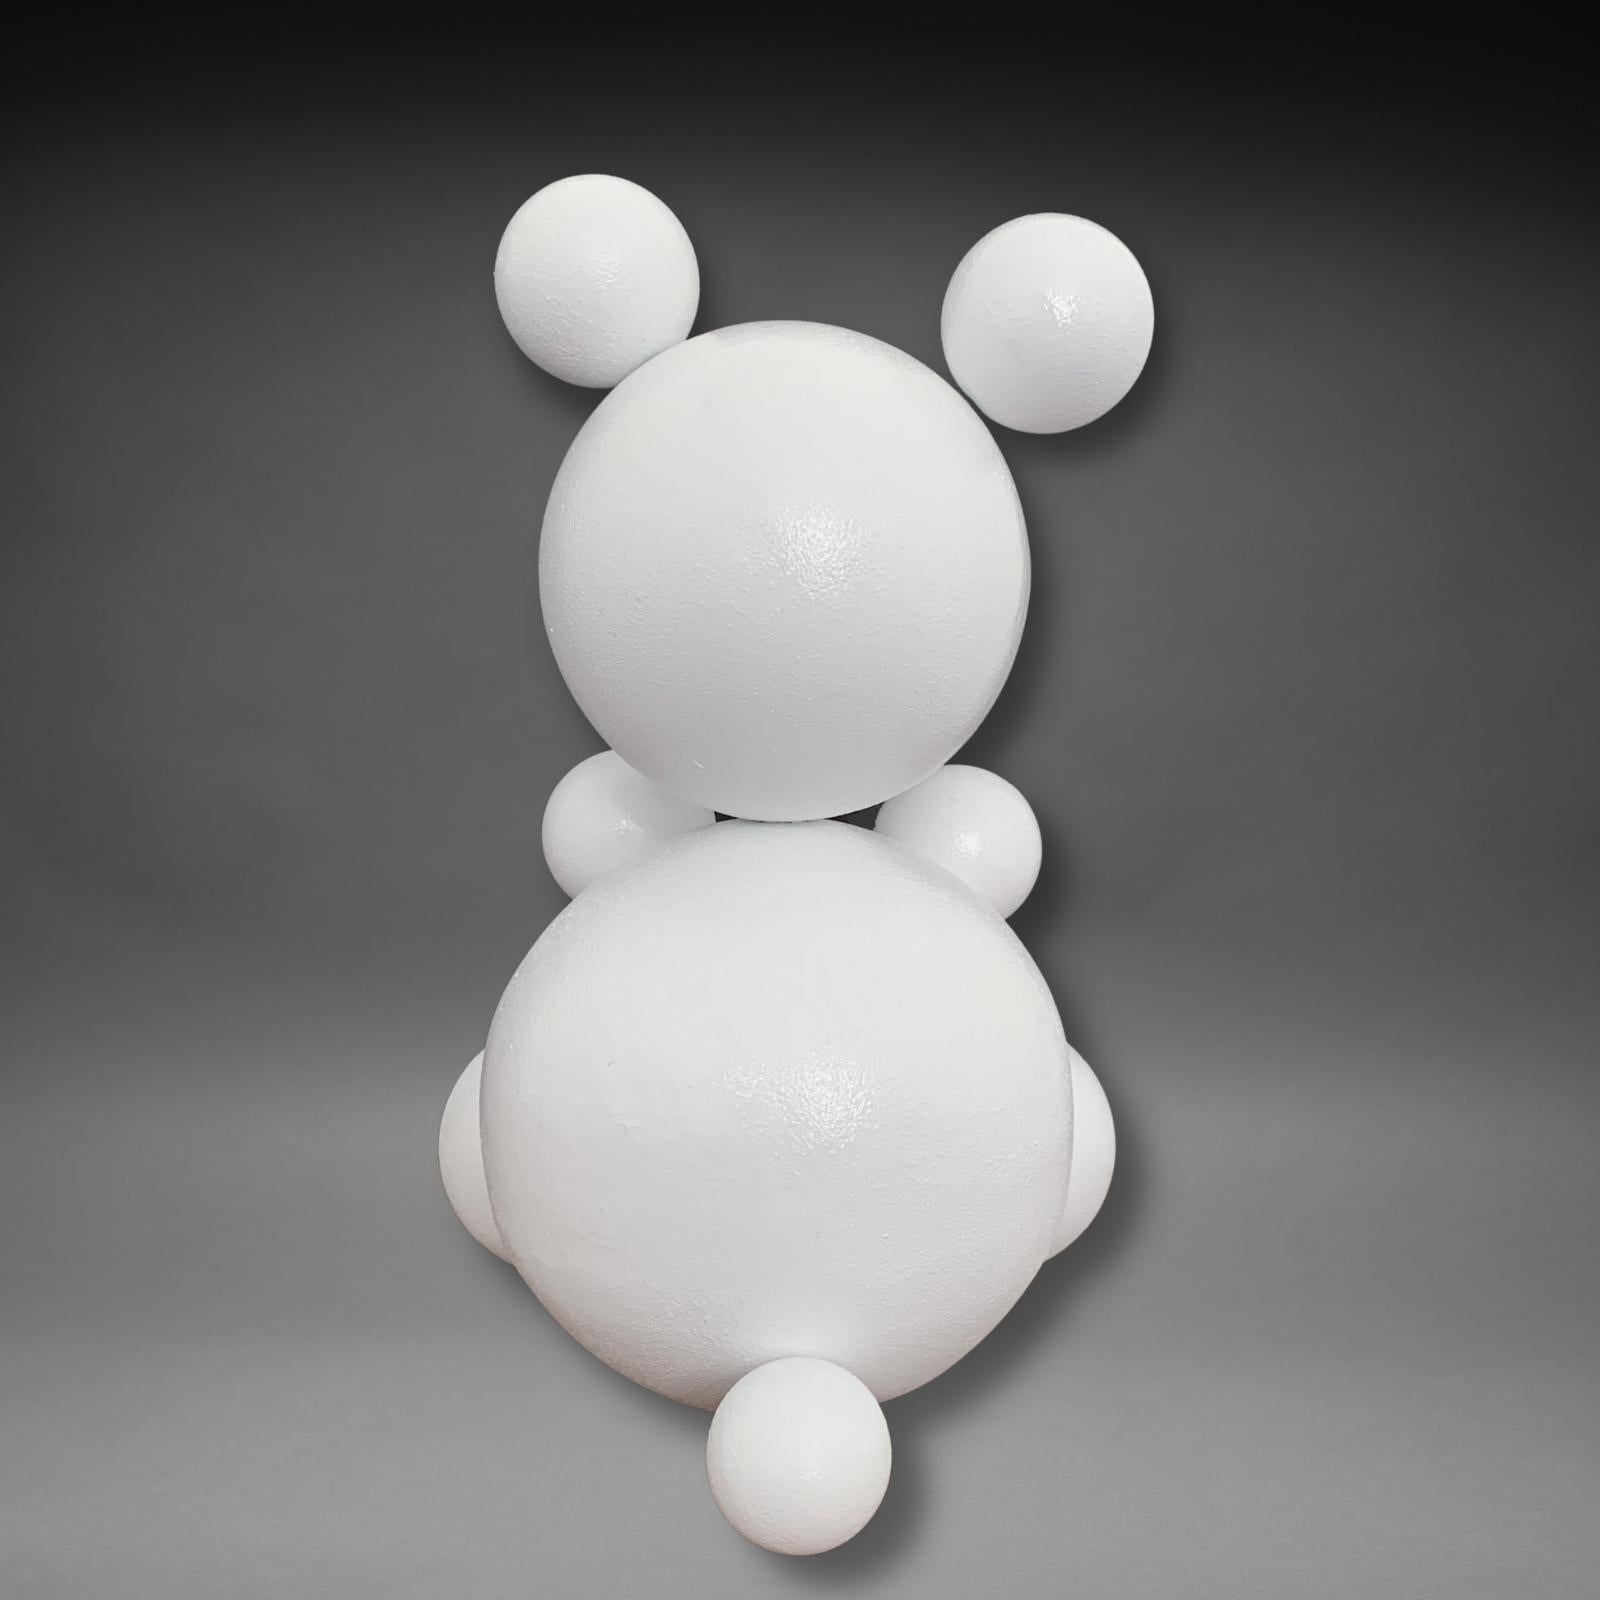 Total White Steel Bear Animal Abstract Sculpture - Gray Figurative Sculpture by Rostyslav Kozhman